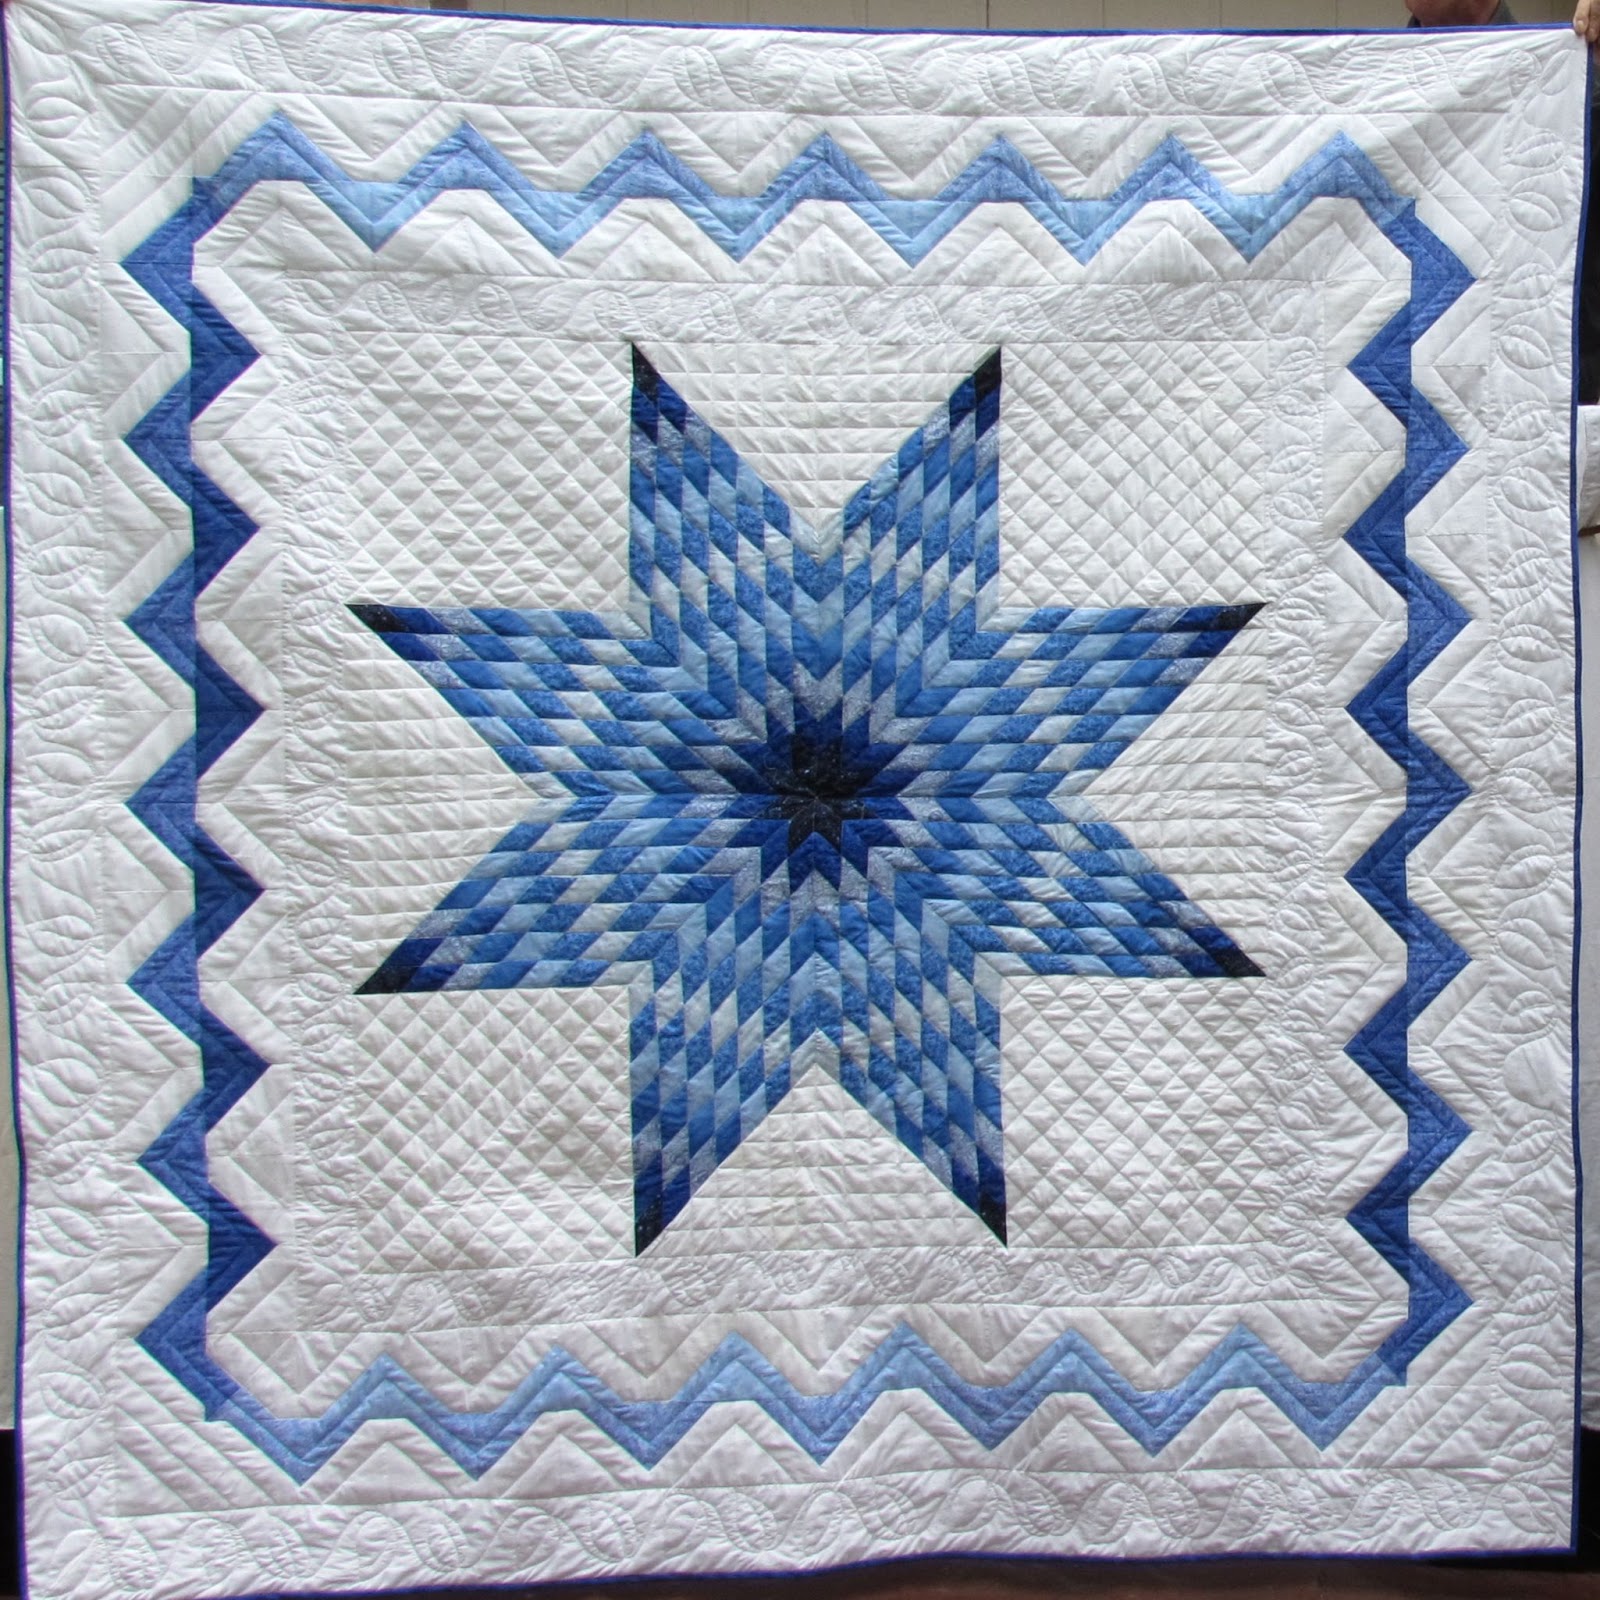 Pieceful Afternoon: Lone Star Quilt Number Five - Jason1600 x 1600